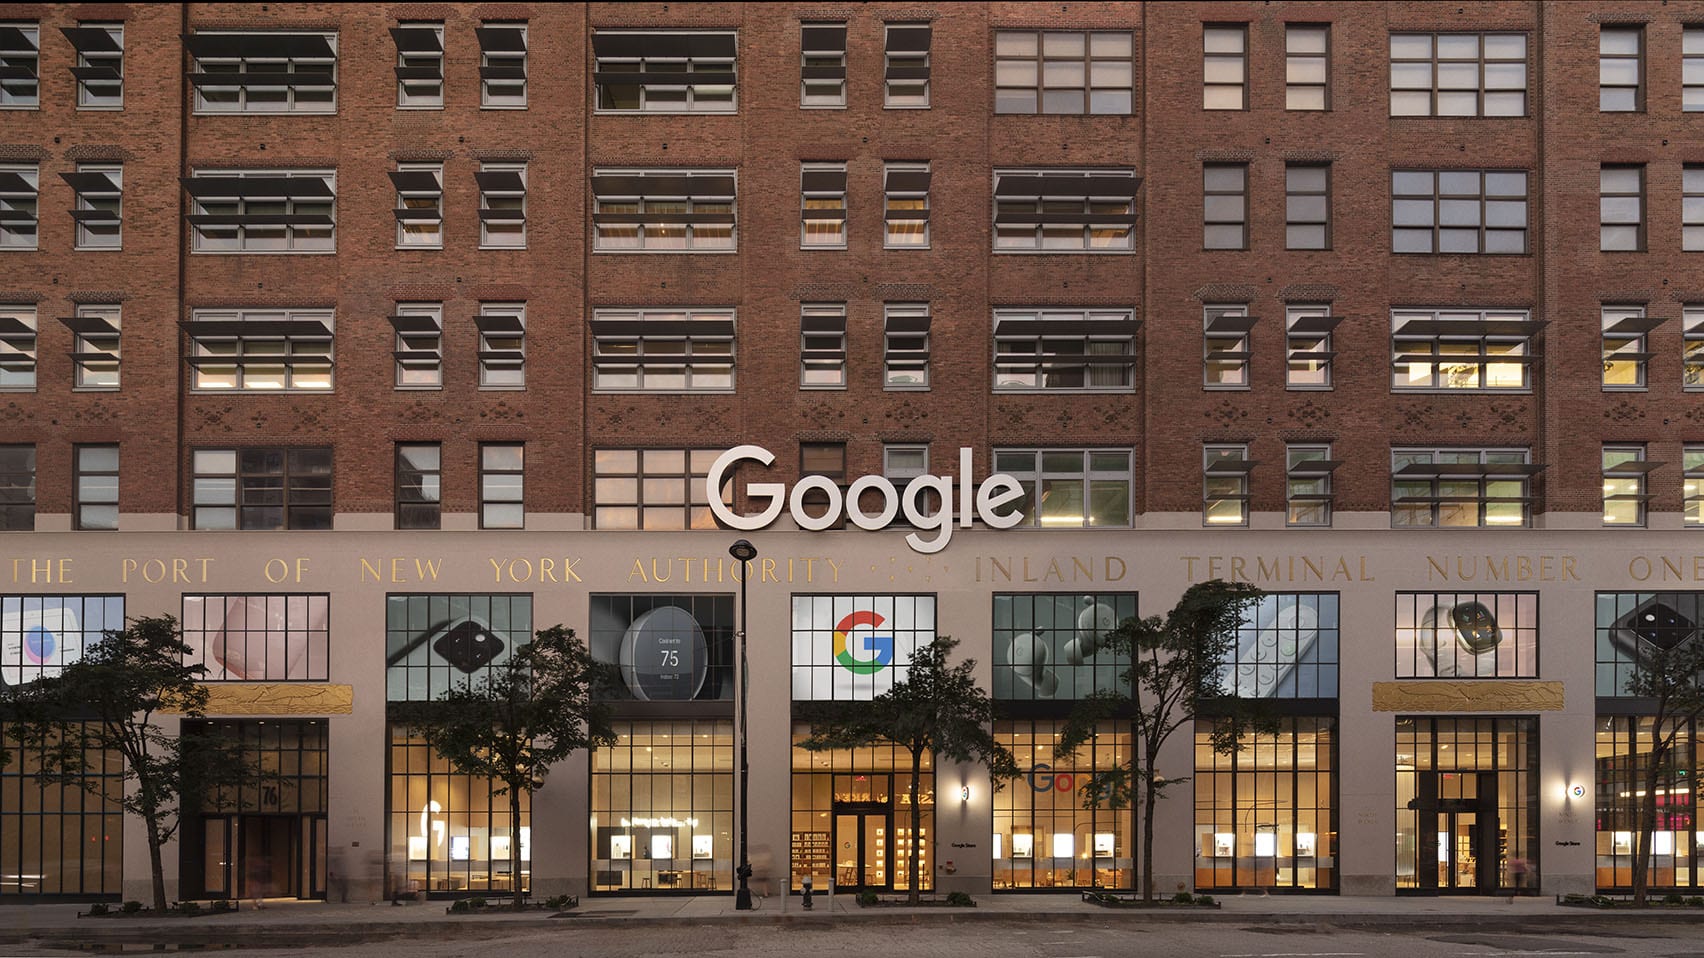 Exterior view of Google Store